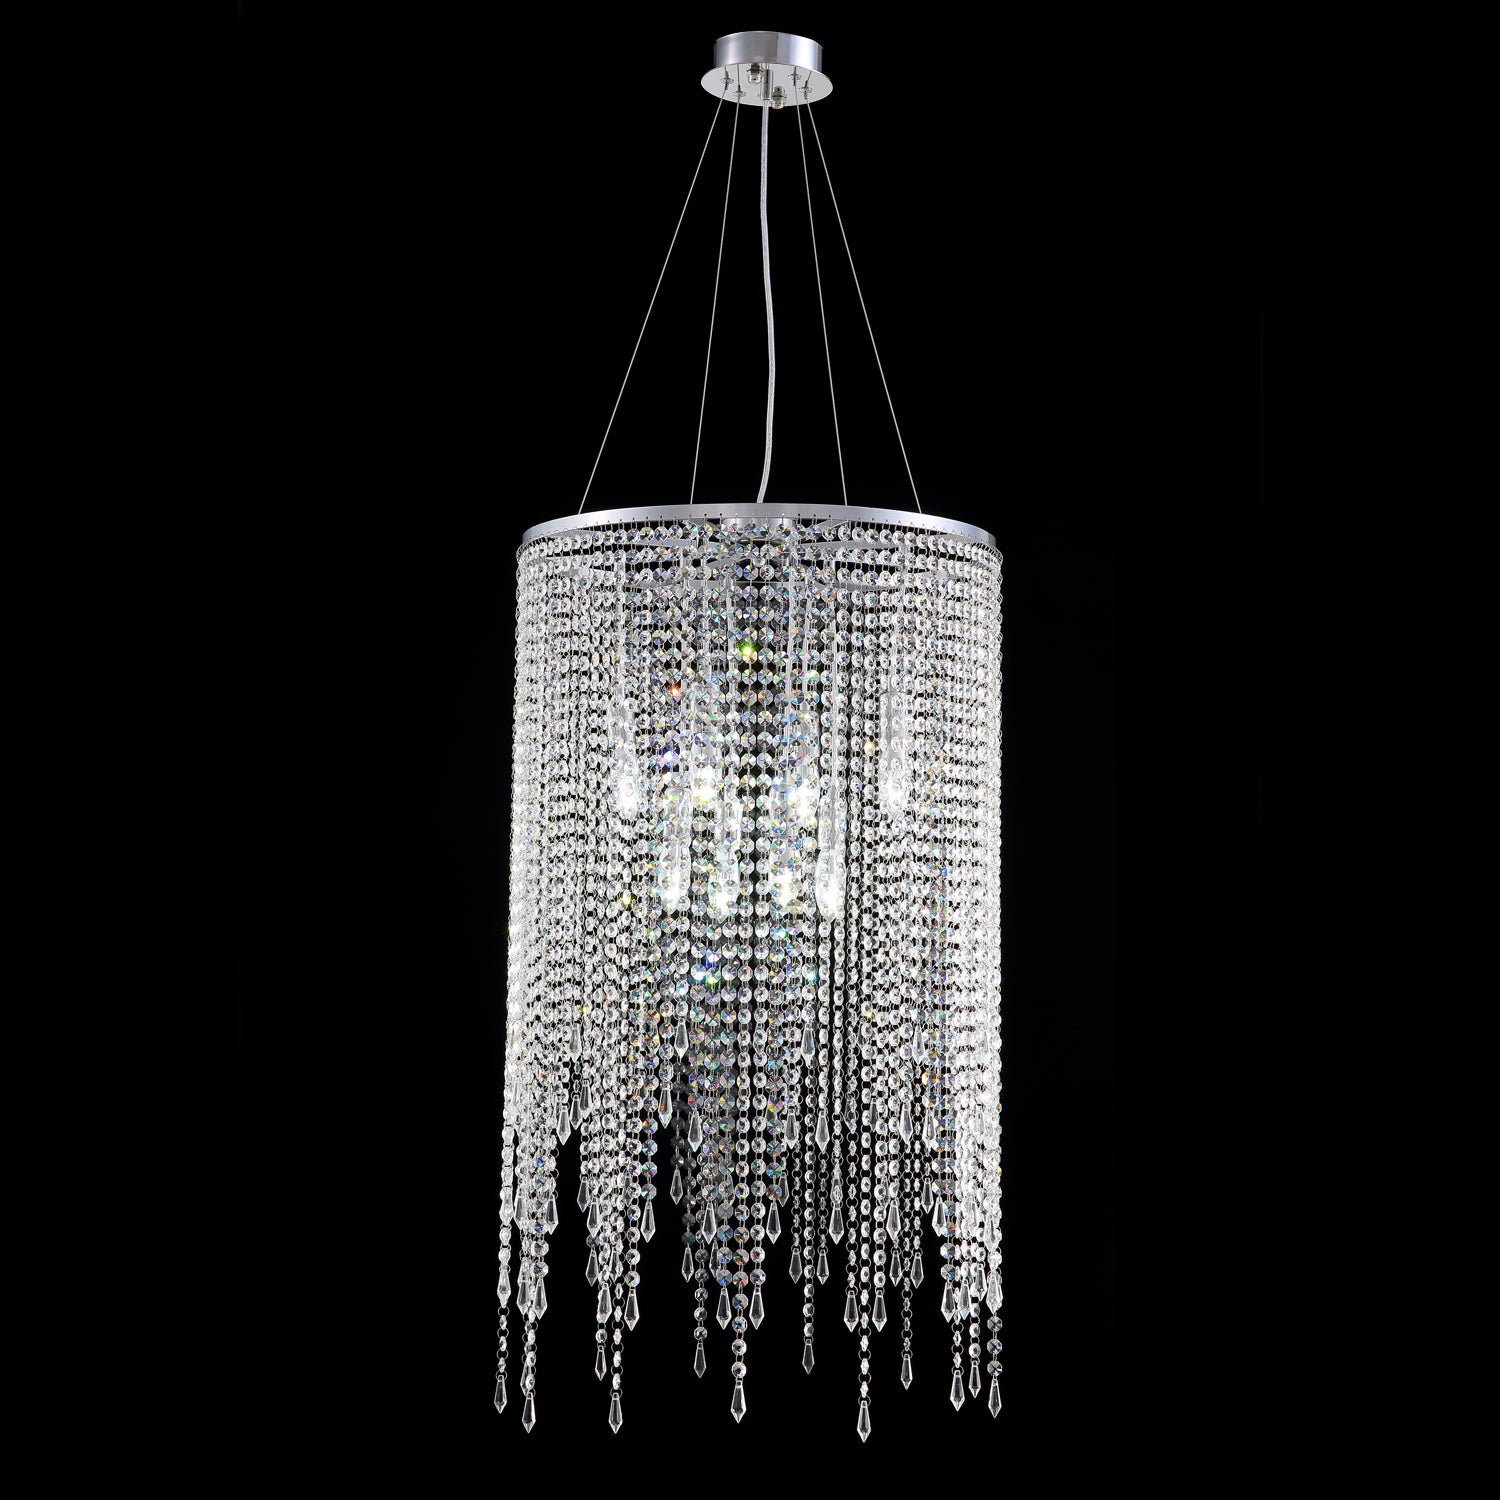 Luxury Linear Round Contemporary Island Crystal Chandelier With Cool Light